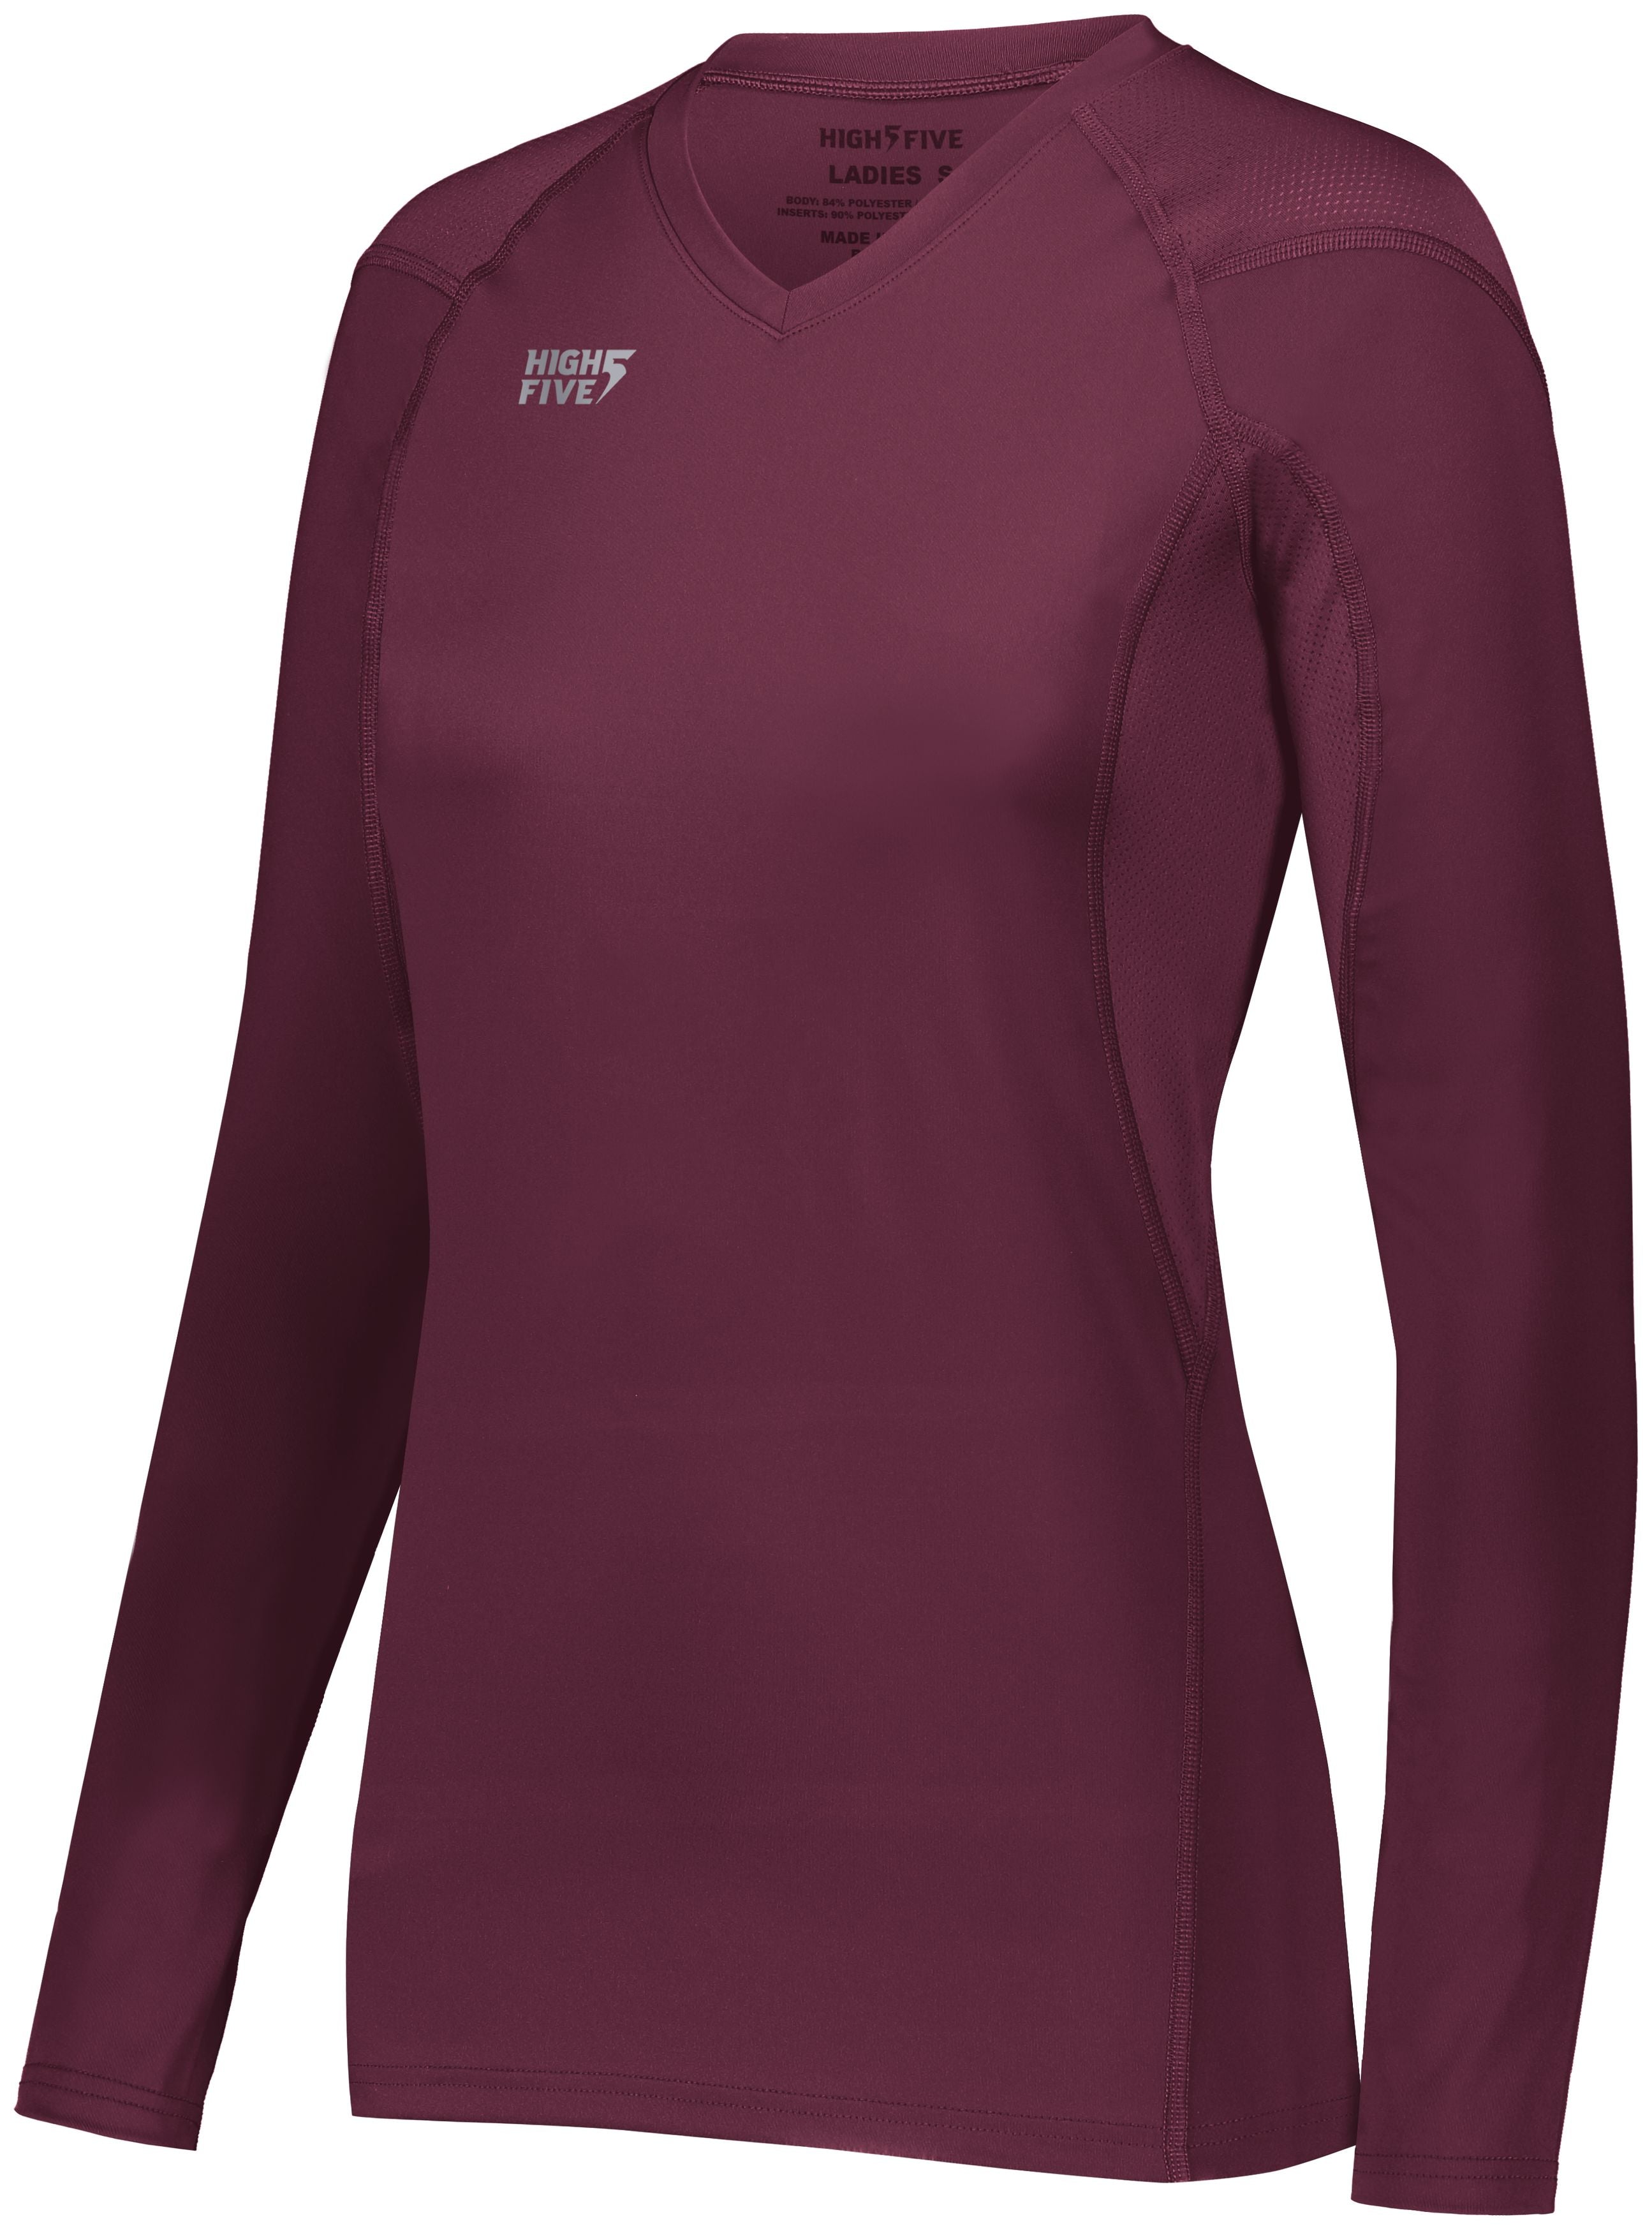 High 5 Girls Truhit Long Sleeve Jersey in Maroon (Hlw)  -Part of the Girls, High5-Products, Volleyball, Girls-Jersey, Shirts product lines at KanaleyCreations.com